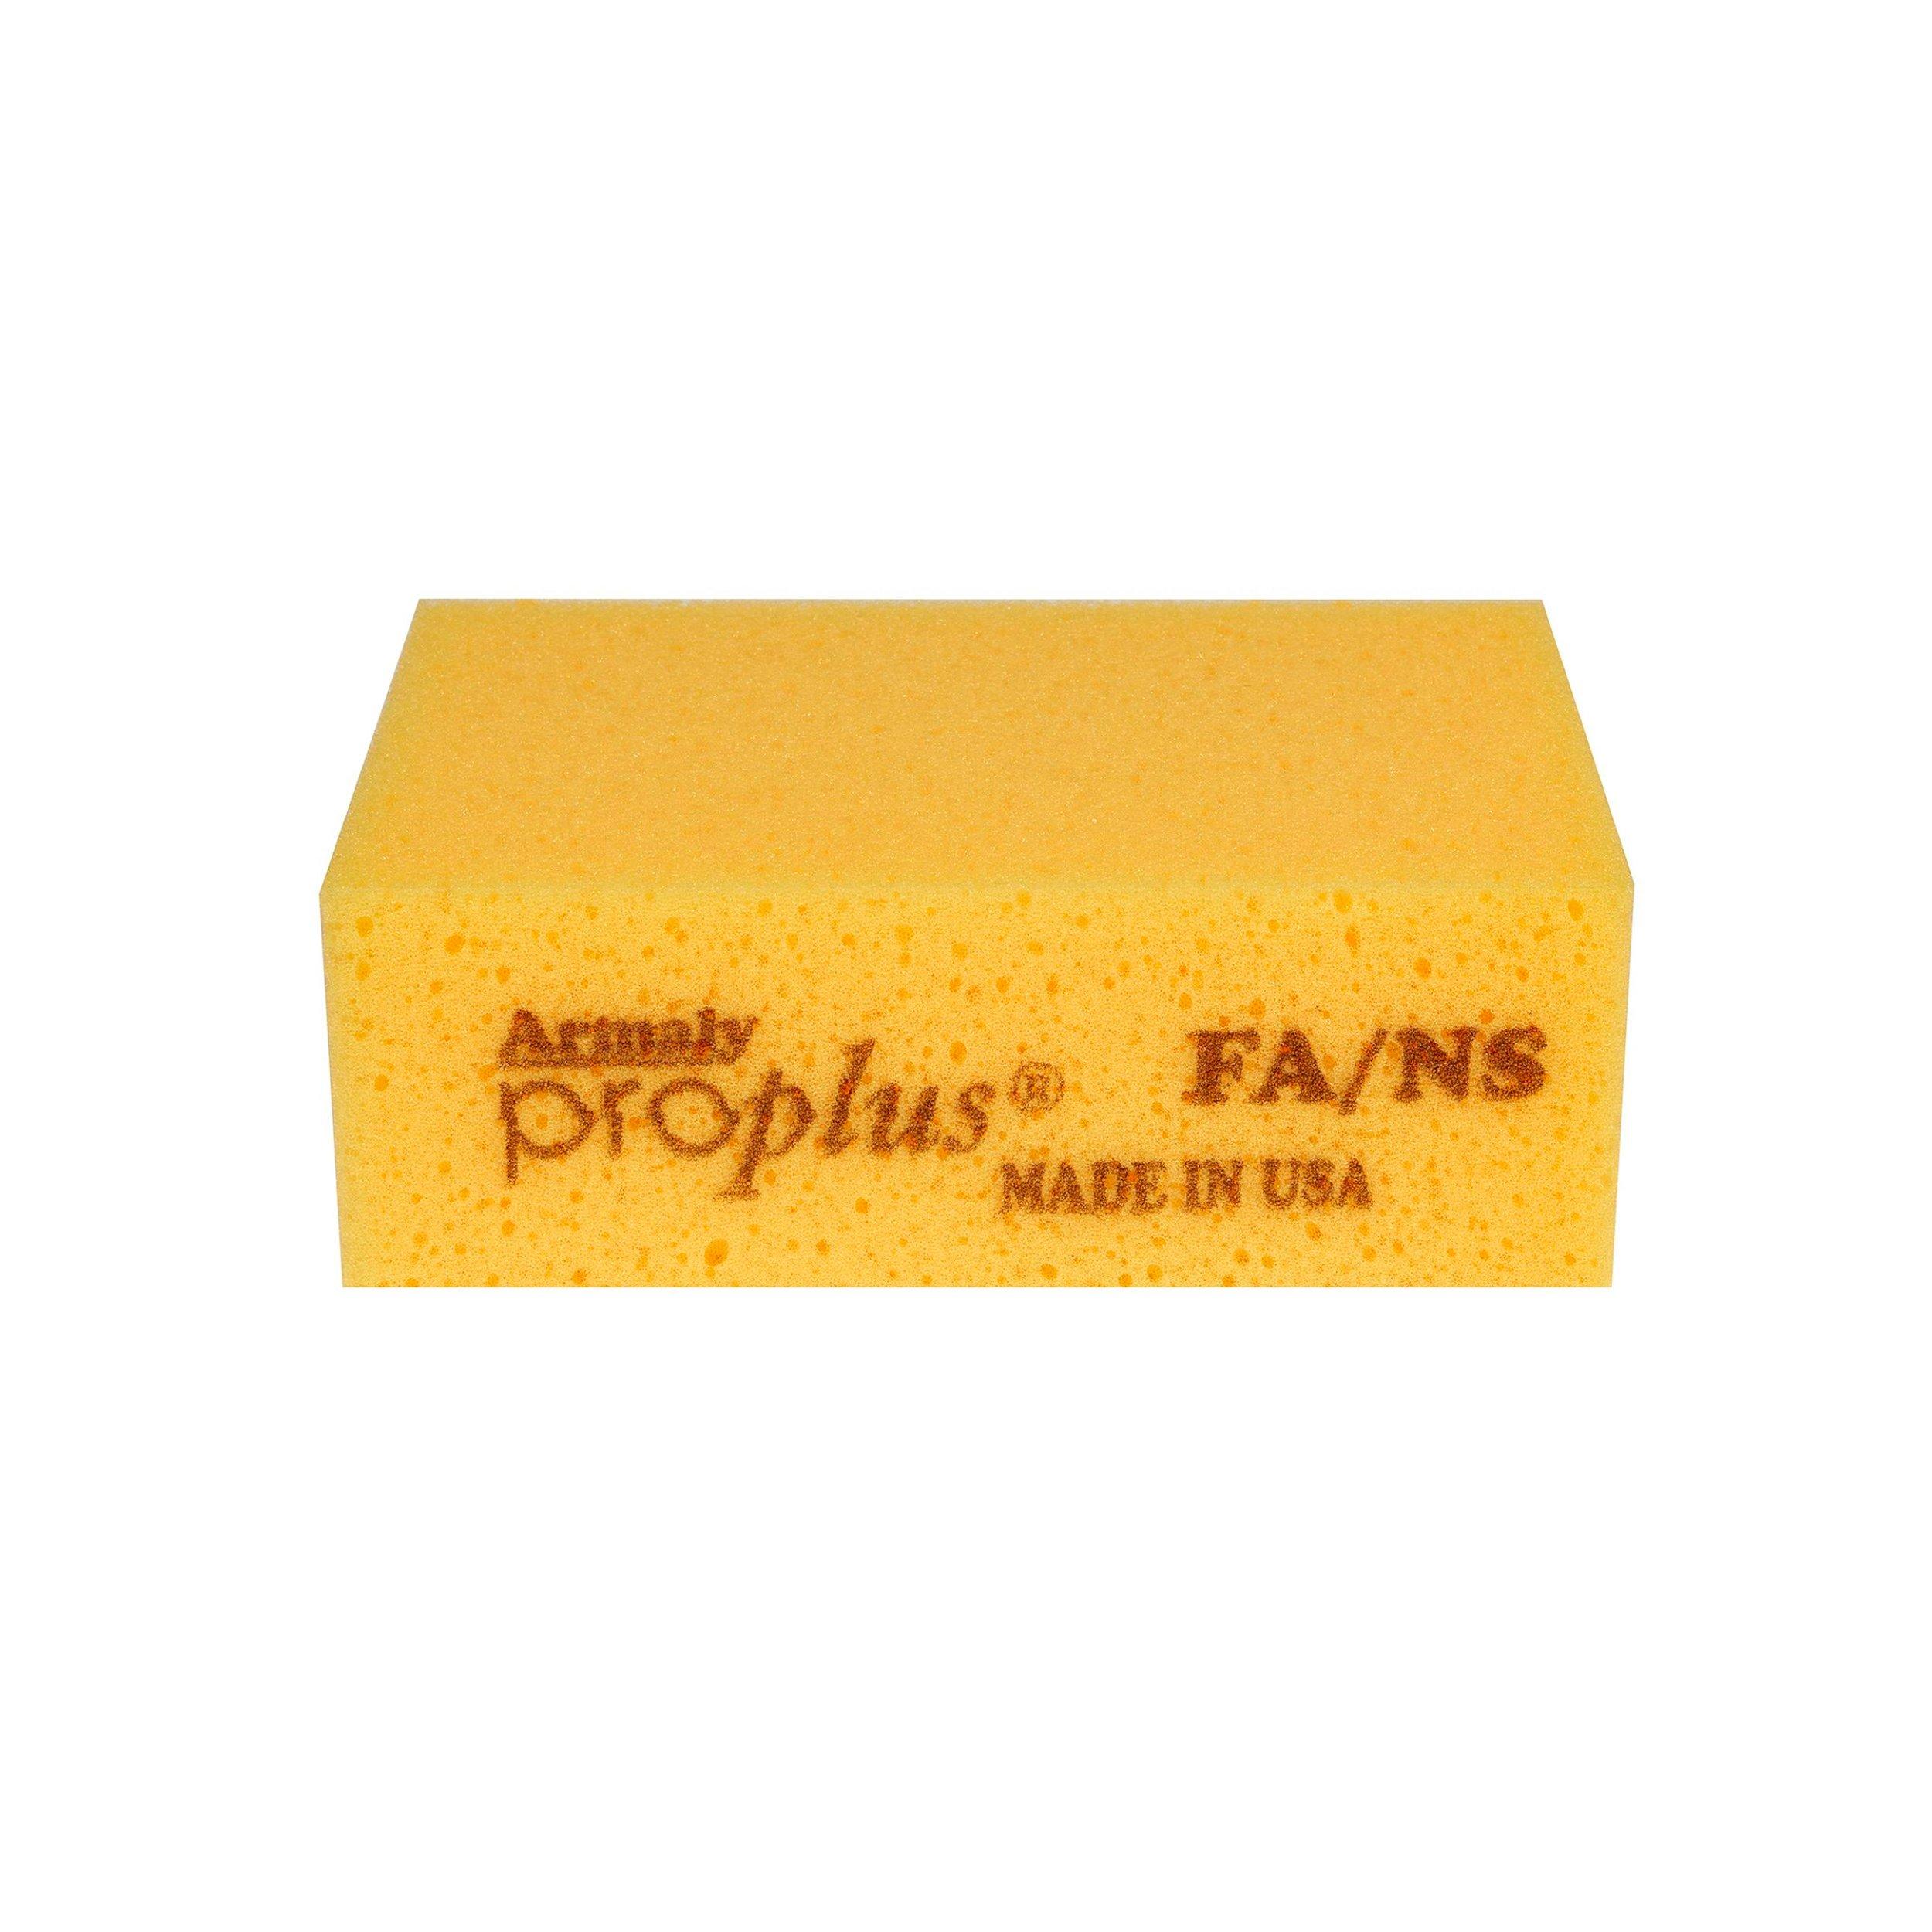 Armaly ProPlus FA/NS Grout Sponge